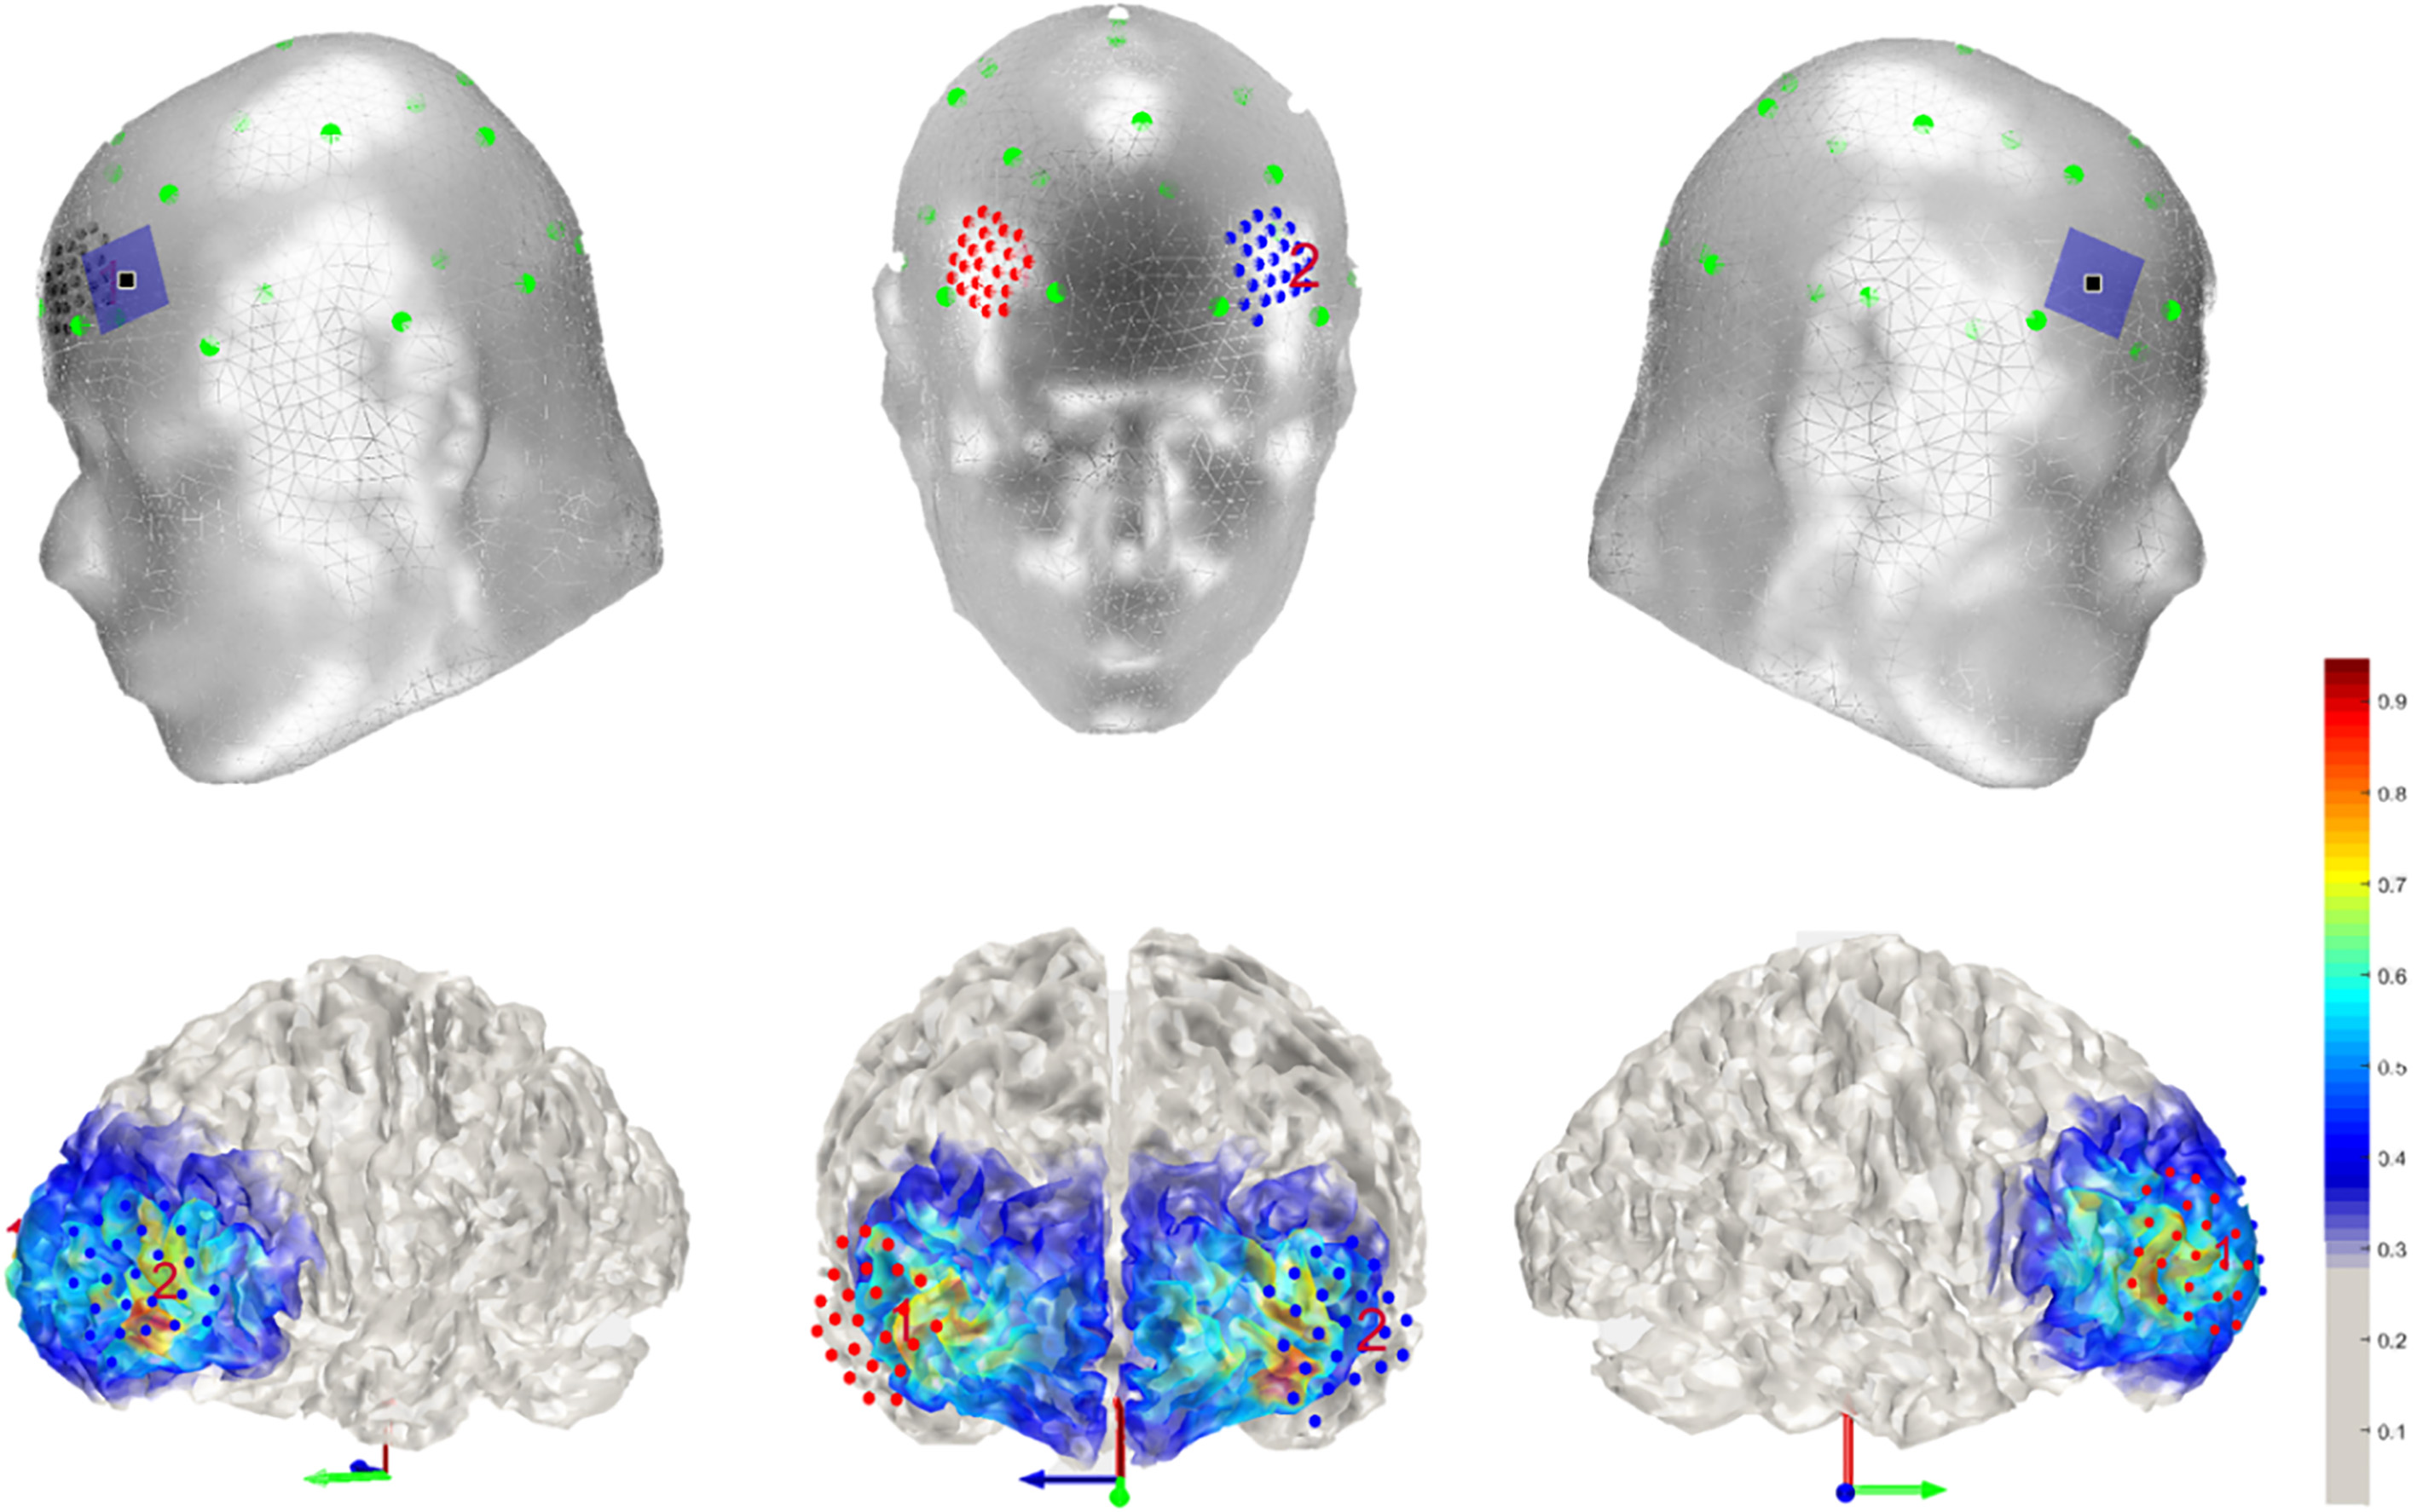 tDCS simulation result from COMETs software. The first column shows the electrode location and shape (3 cm × 3 cm) for brain stimulation. The second column shows the 3D cortex imaging, including the stimulated areas.